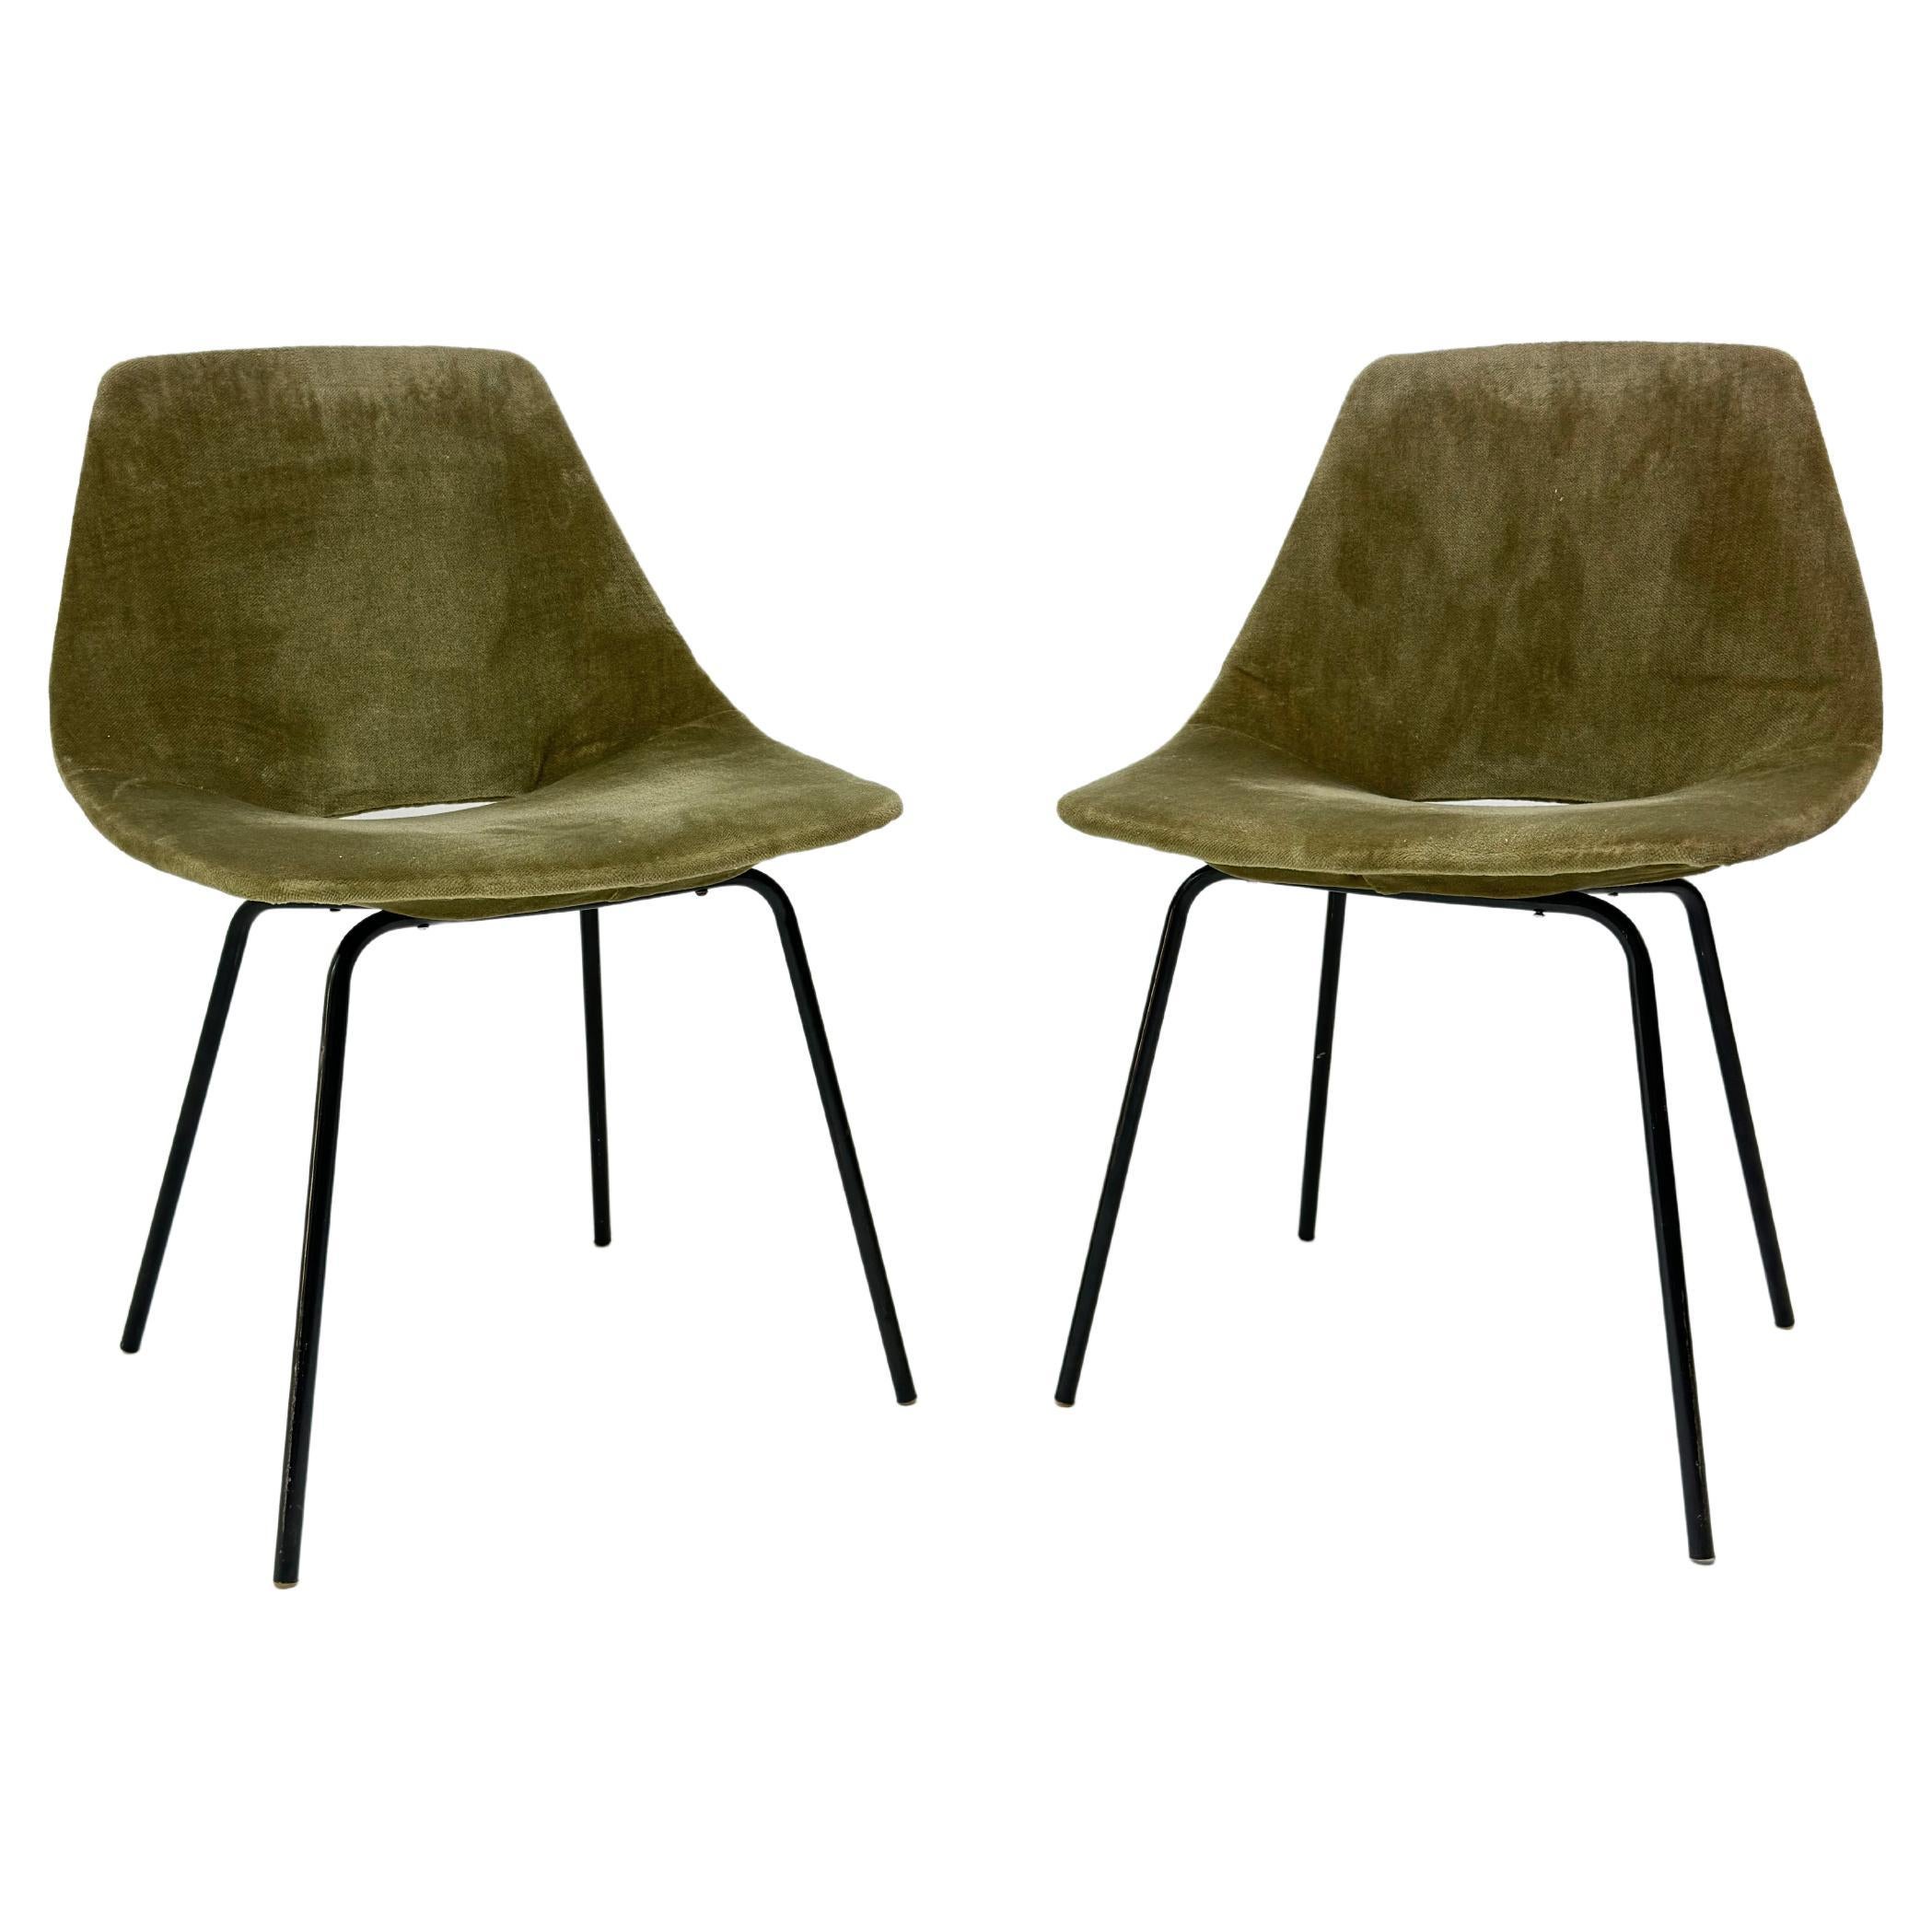 Set of 2 Amsterdam Chairs in Green Velour, by Pierre Guariche, France 1950's